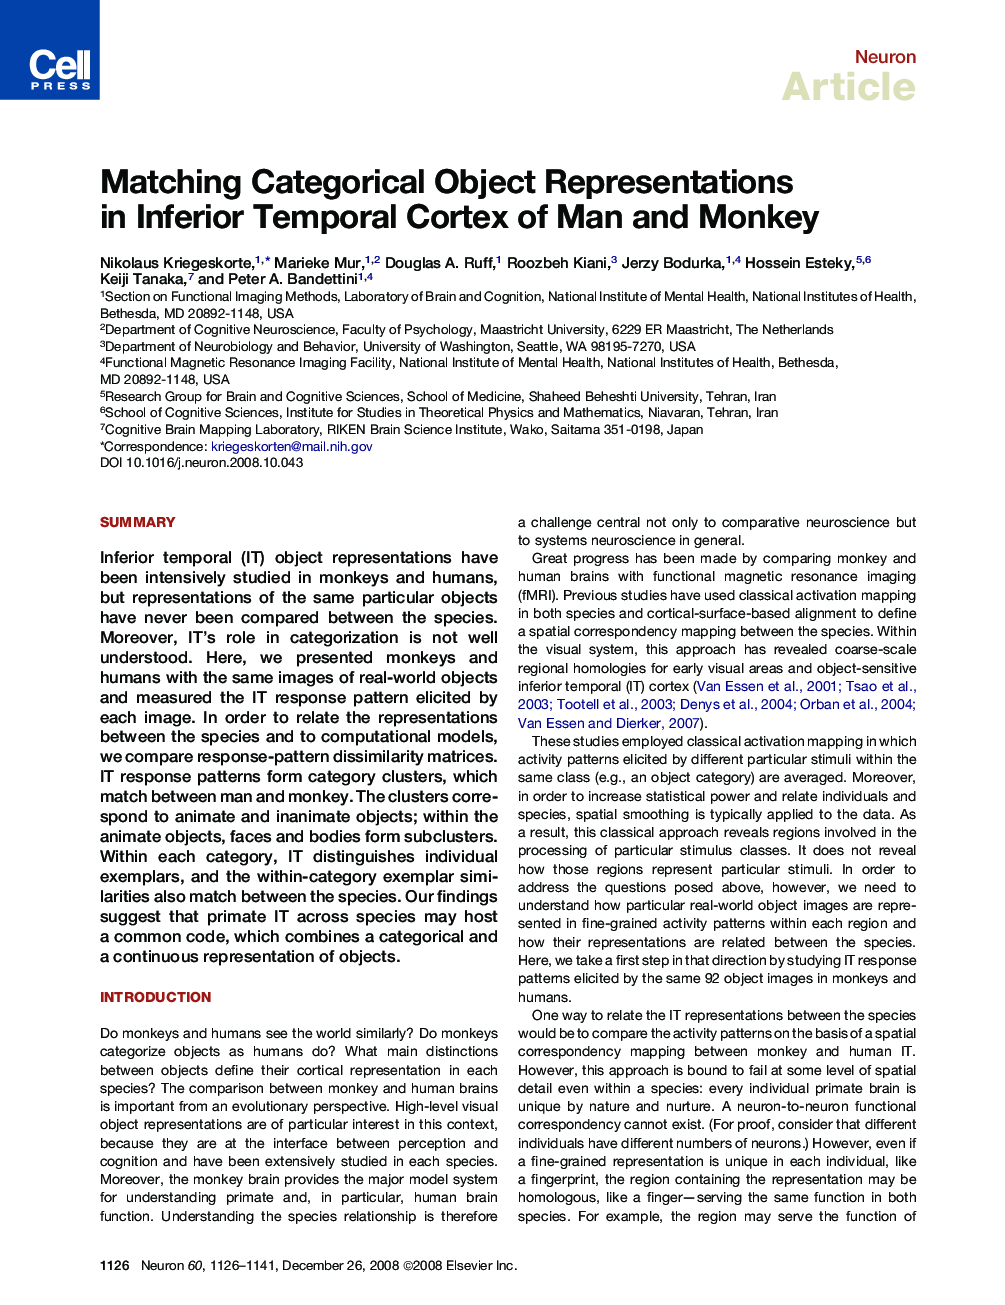 Matching Categorical Object Representations in Inferior Temporal Cortex of Man and Monkey